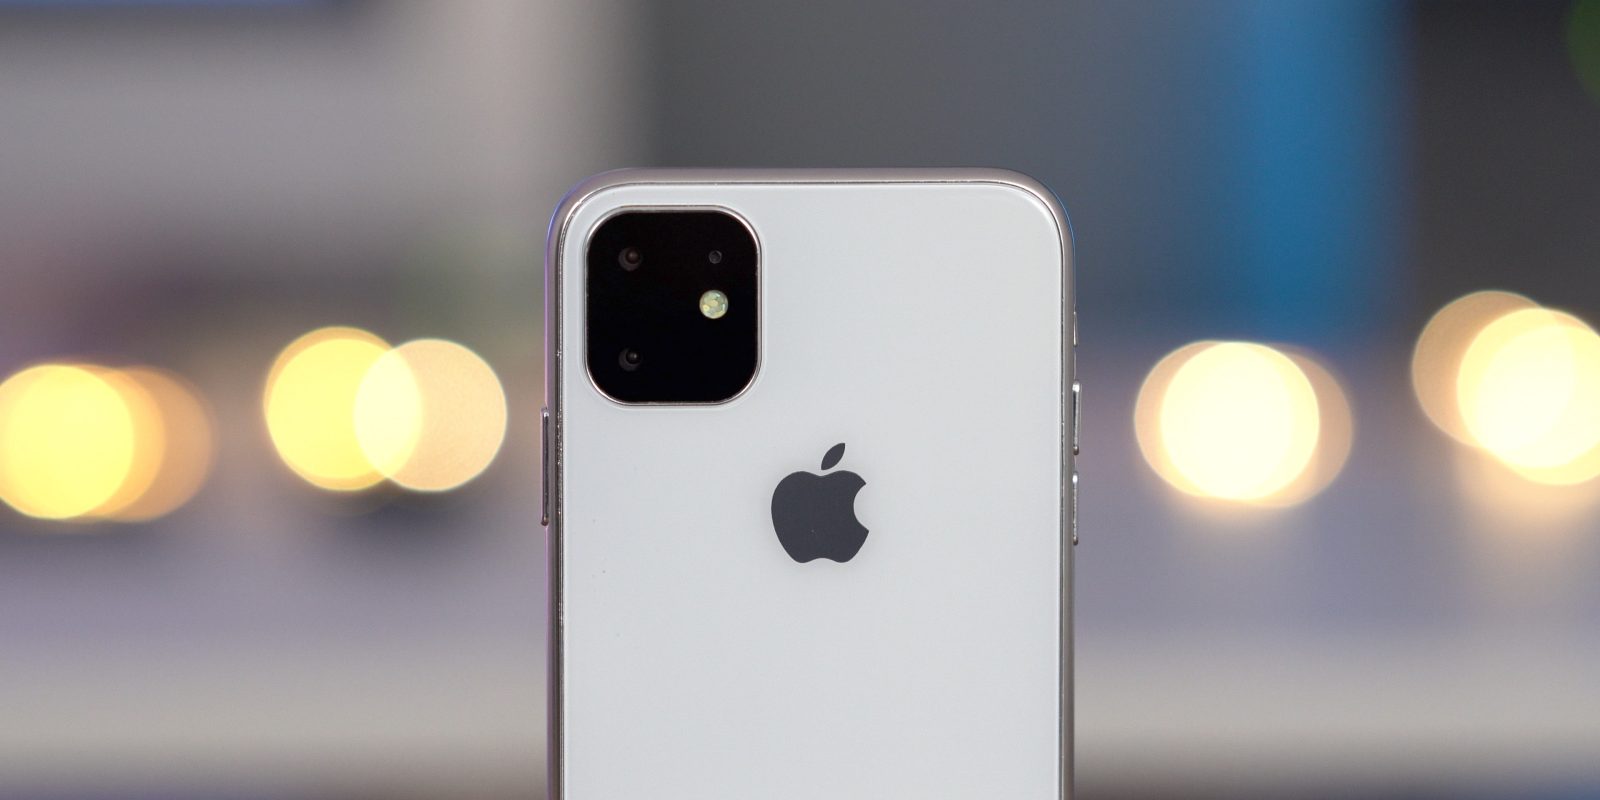 Kuo Key 2020 Iphone Upgrades Will Be All New Design 5g And